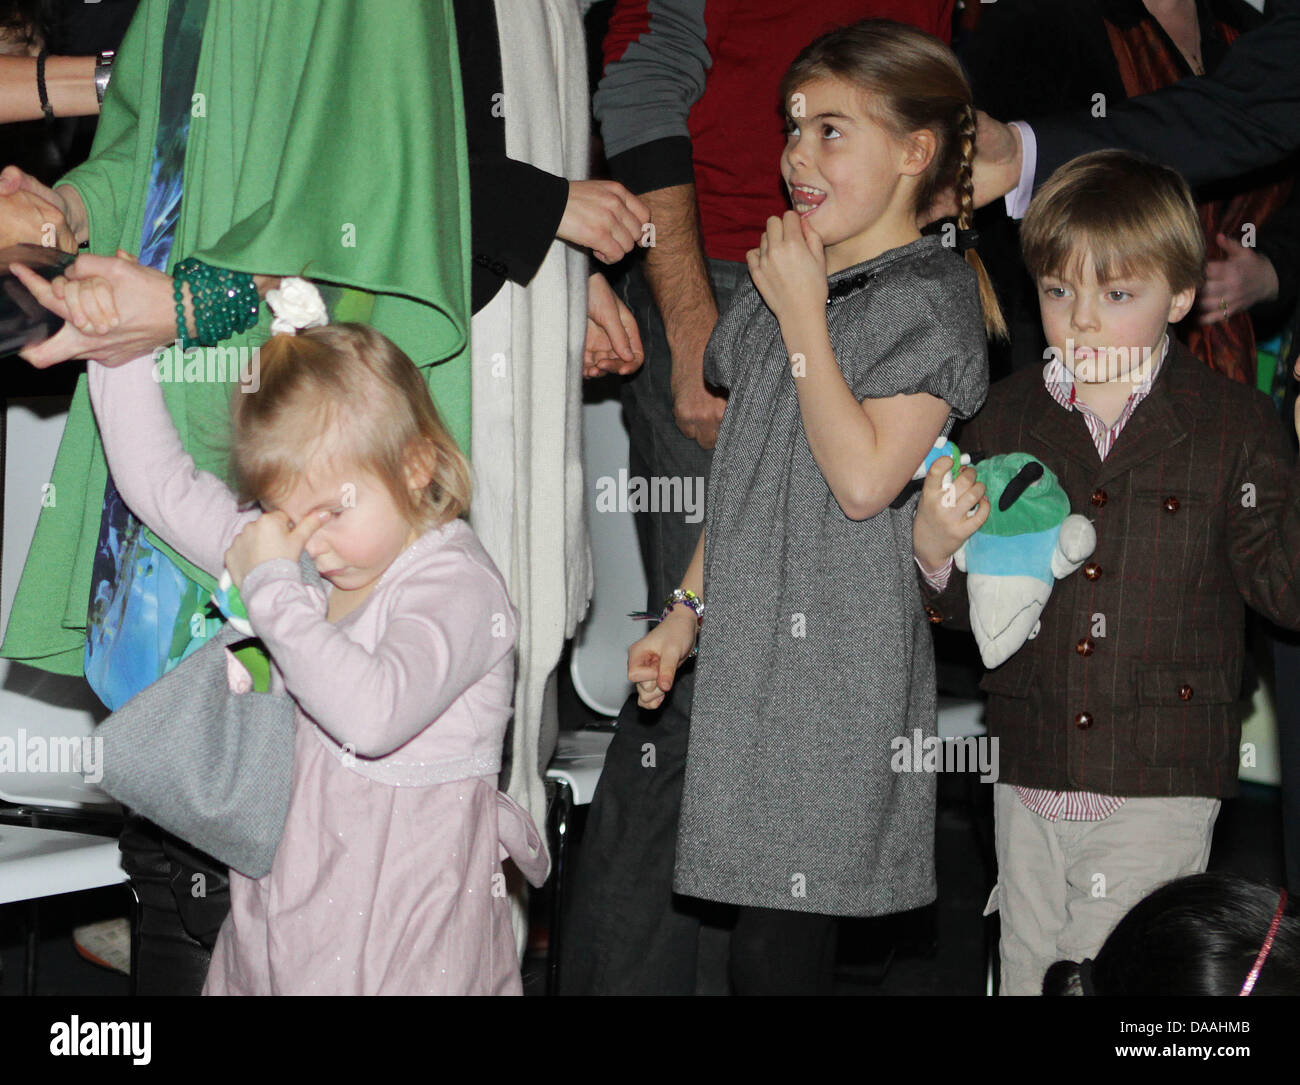 The children of Dutch Princess Laurentien, Princess Leonore, Prince Claus-Casimir and Princess Eloise attend the presention of  Laurentien's new book 'Mr. Finney and the other side of the water' with  her childen Claus-Casimir and Eloise in Rotterdam, The Netherlands, 02 February 2011. It is the second book of Princess Laurentien. Photo: Albert Philip van der Werf Stock Photo